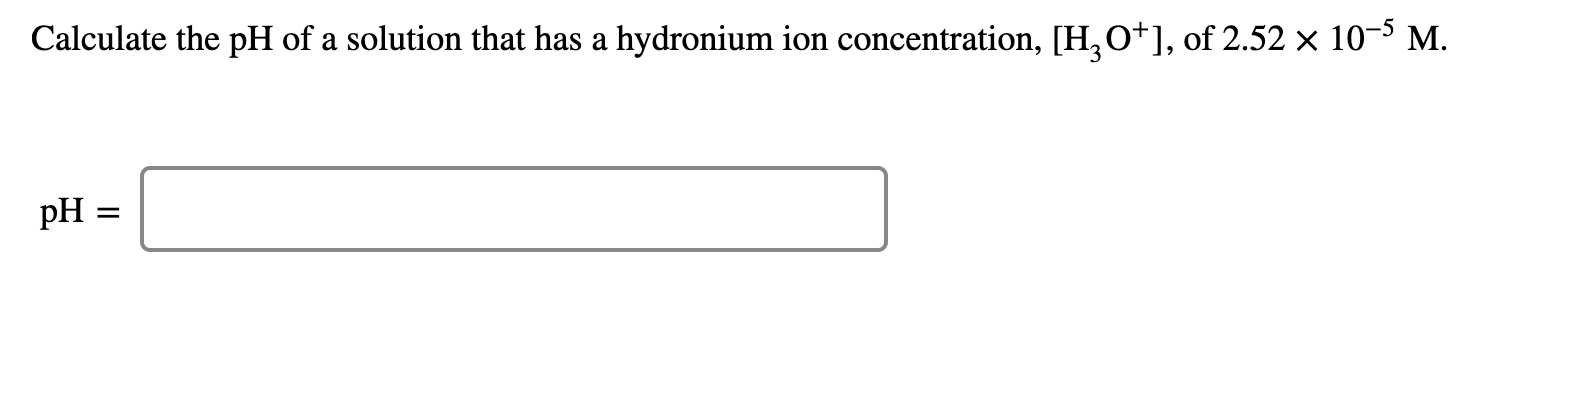 Solved Calculate the pH of a solution that has a hydronium | Chegg.com